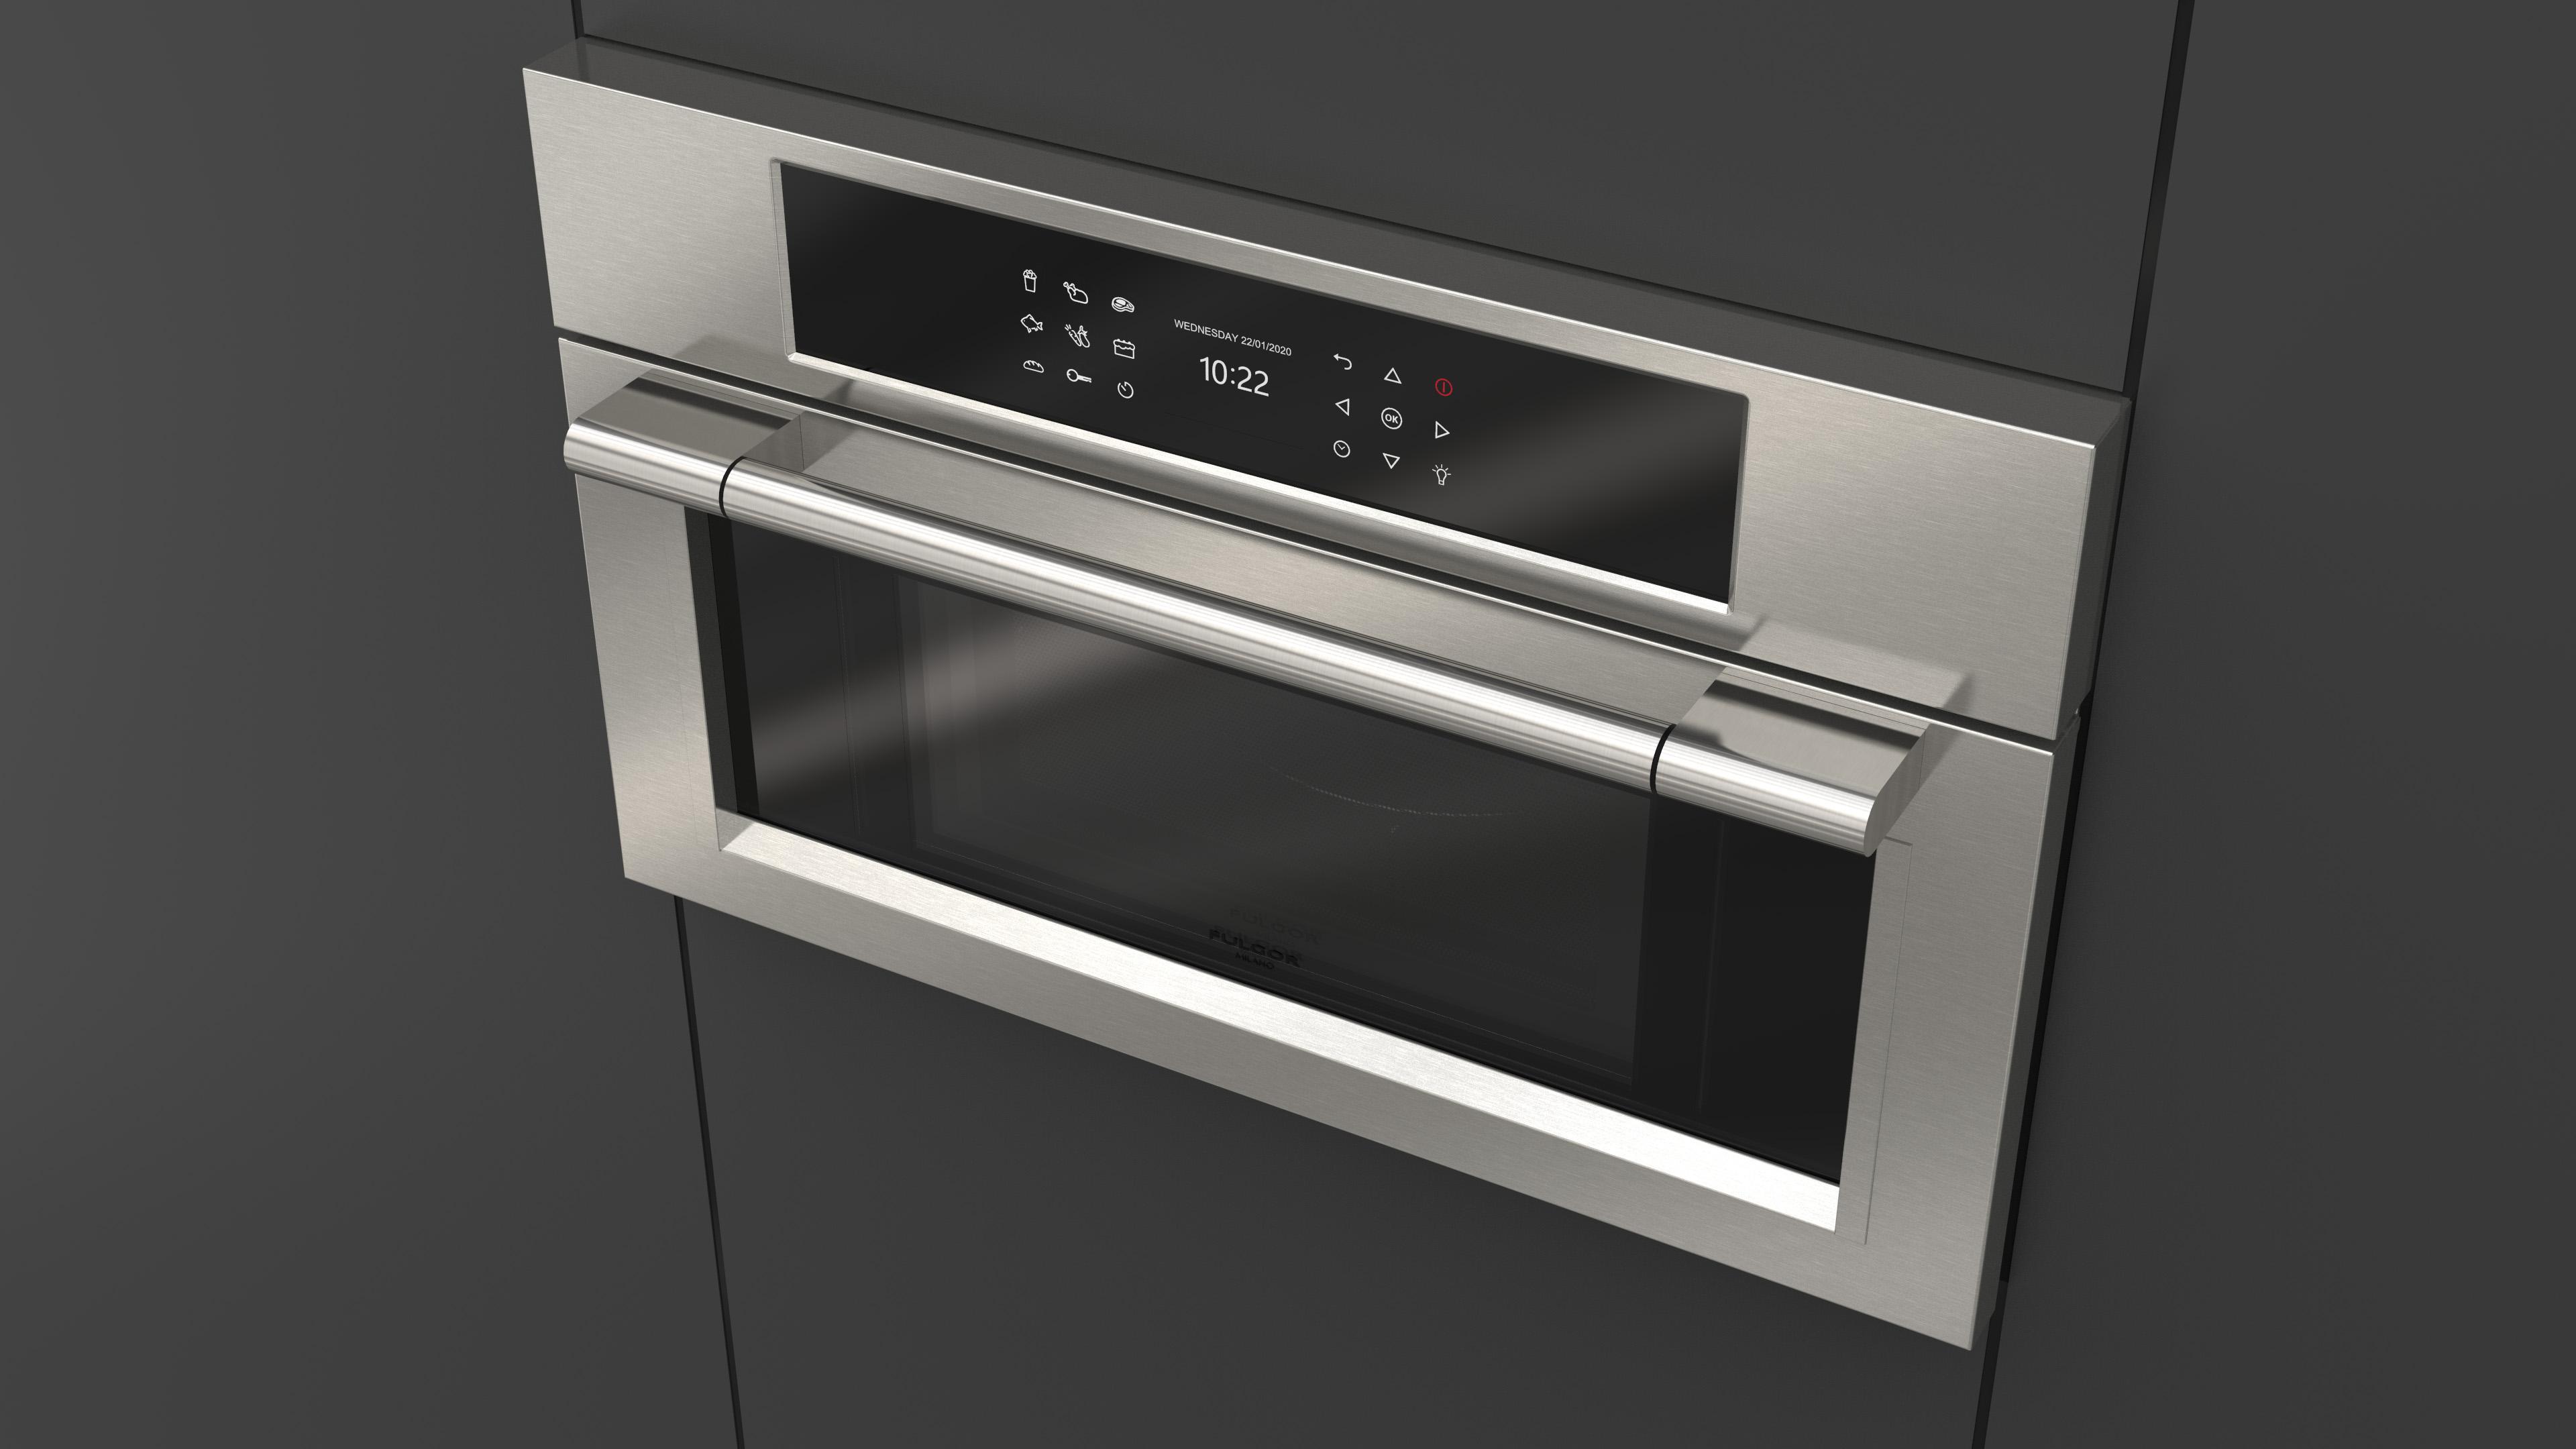 Explore Your Oven Options with Fulgor Milano Speed Ovens & Steam Ovens 5